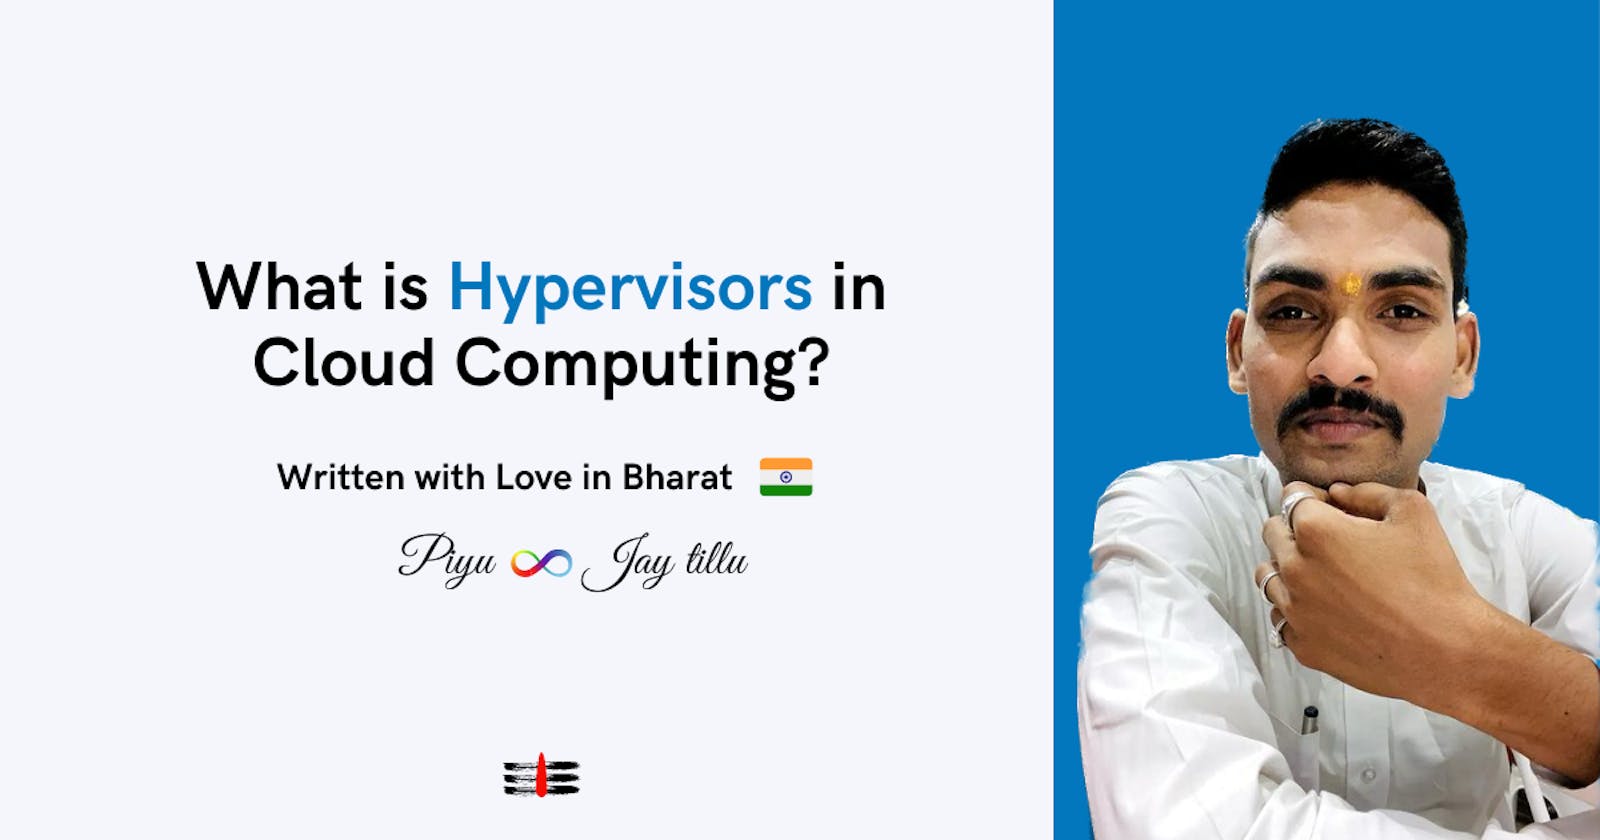 What is Hypervisors in Cloud Computing?